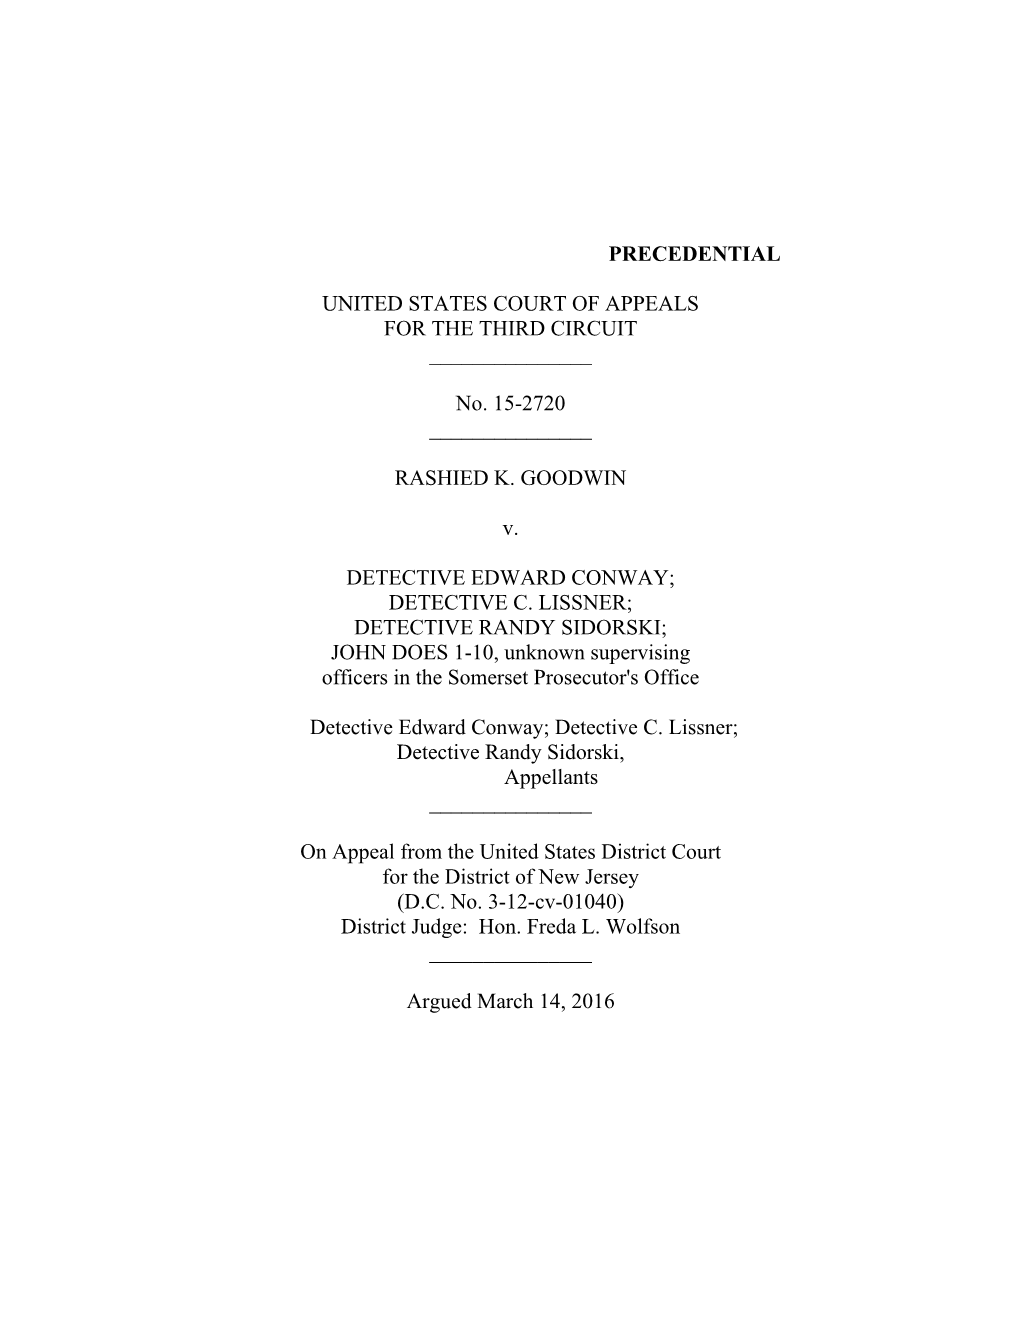 PRECEDENTIAL UNITED STATES COURT of APPEALS for the THIRD CIRCUIT No. 15-2720 RASHIED K. GOODWIN